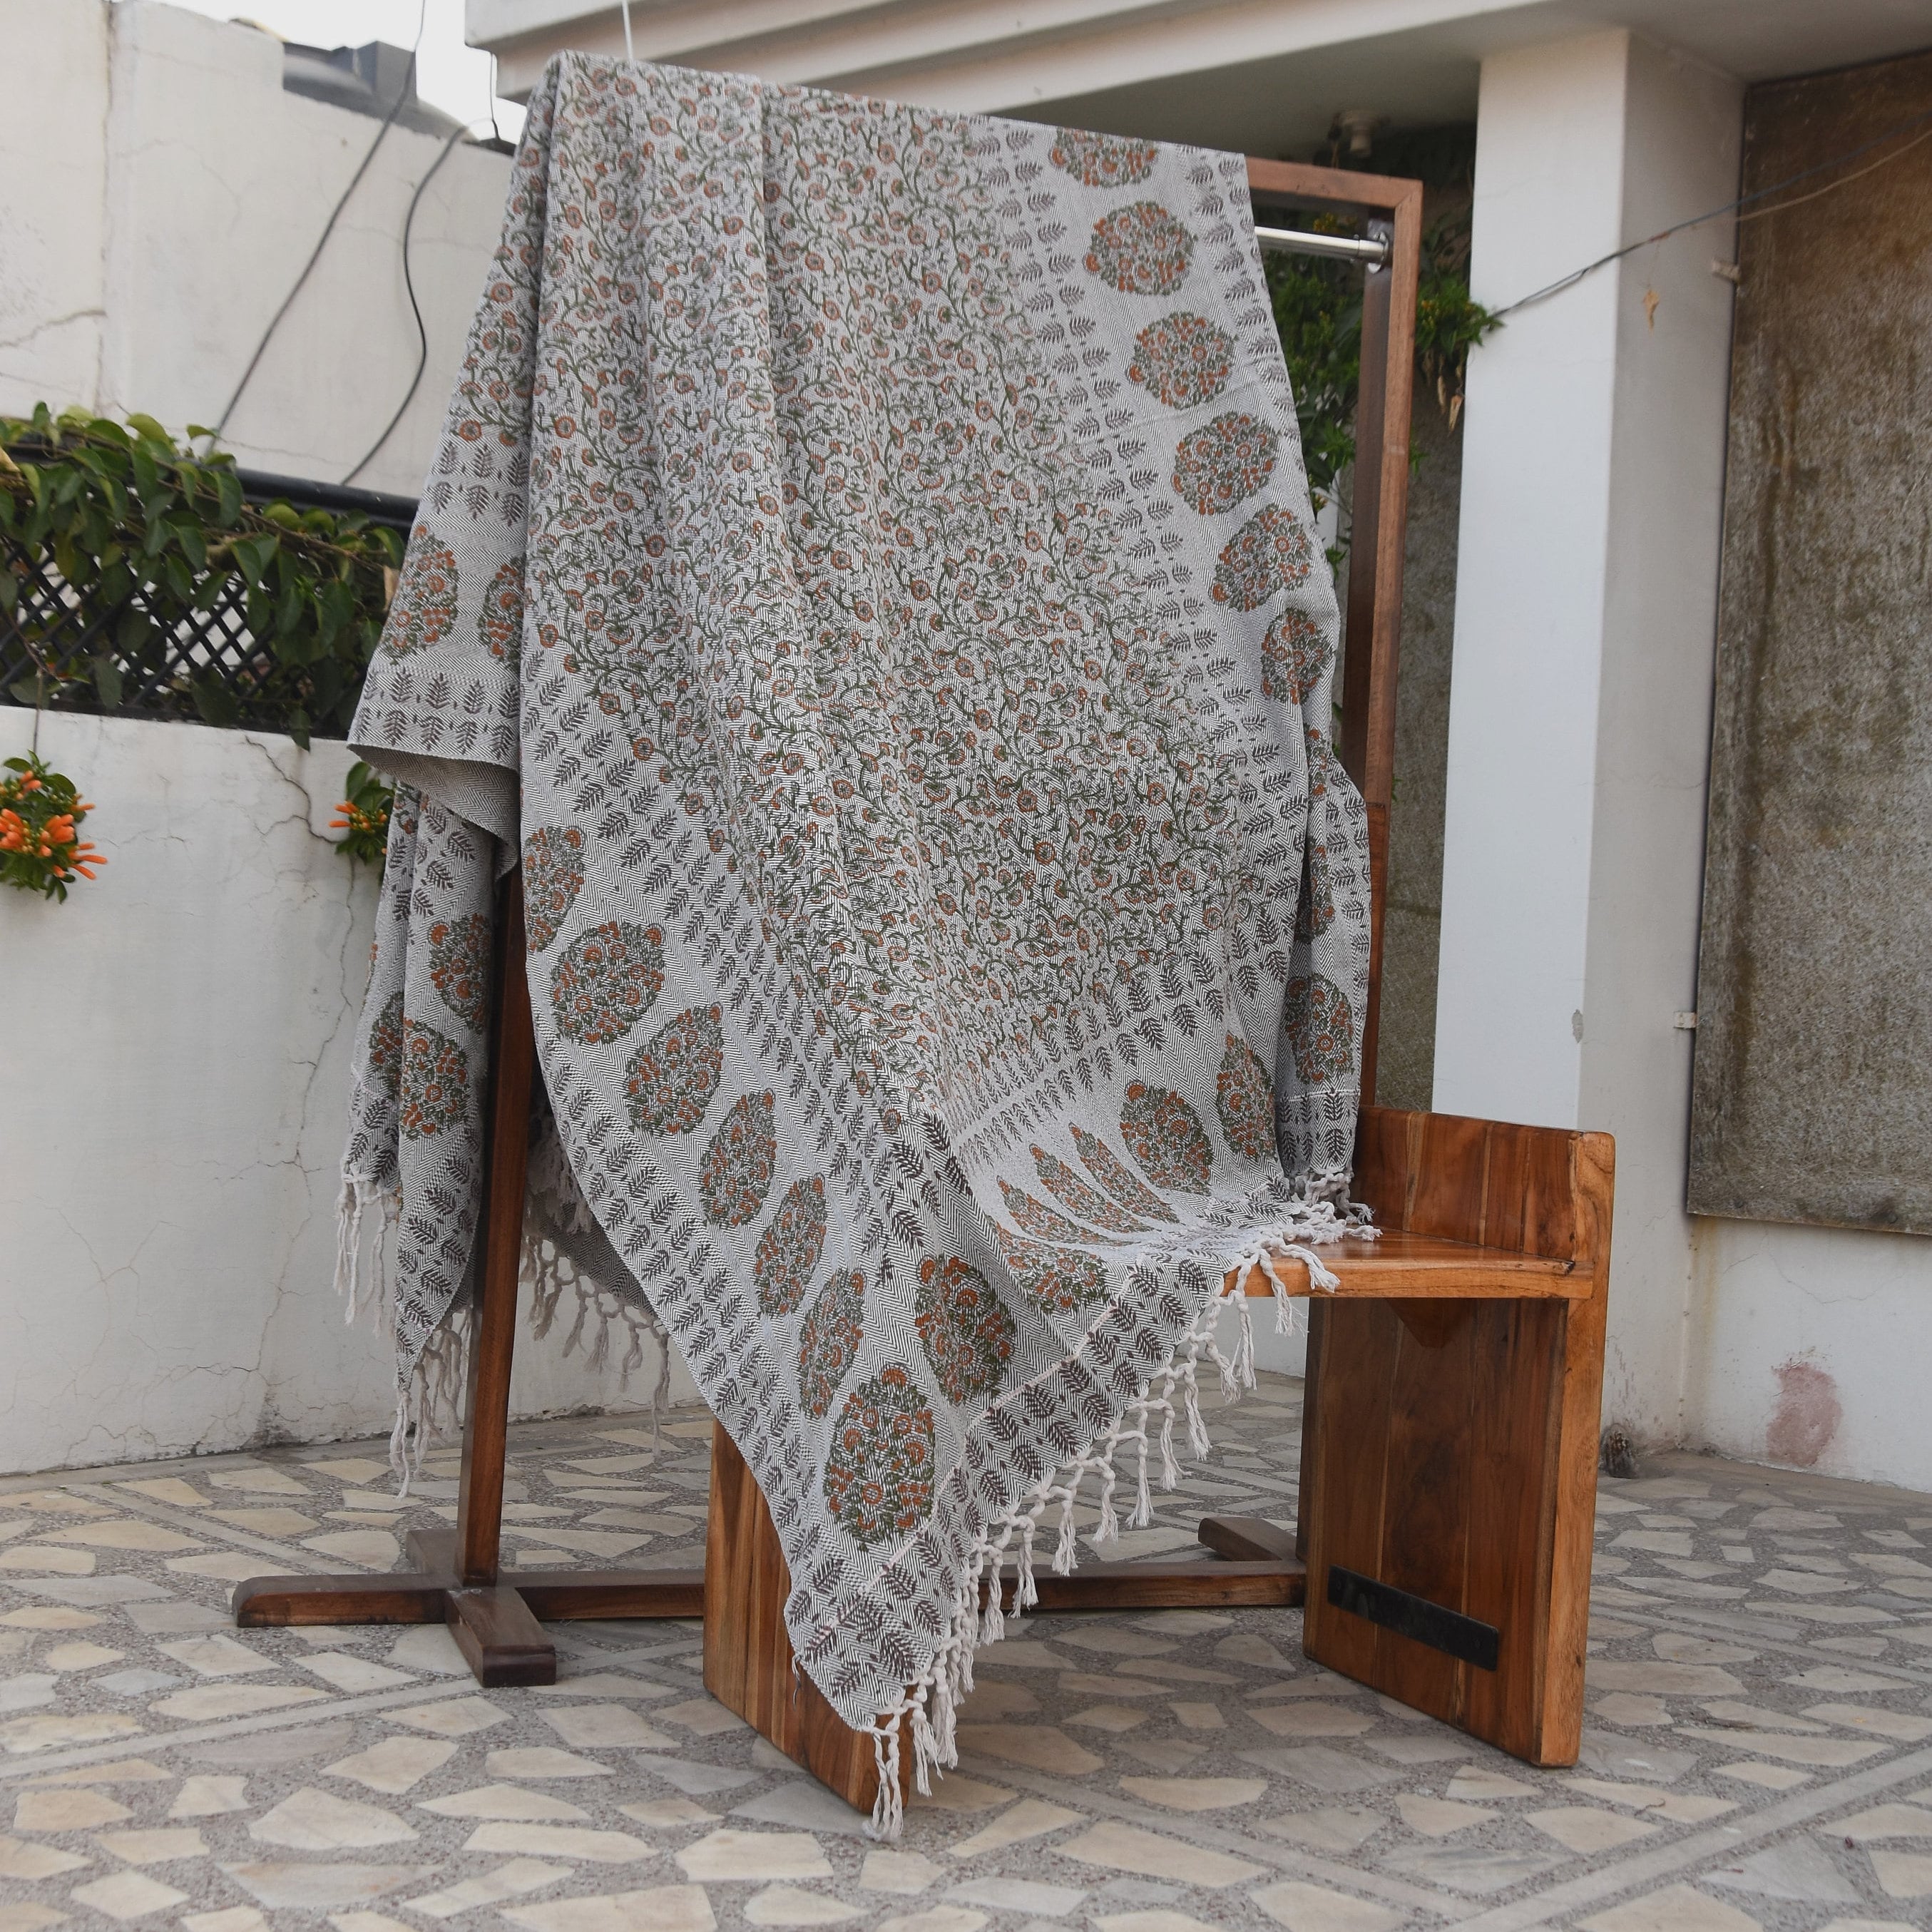 Blankets and Throws - Handwoven Block Print Throws - Handmade Blankets - Handwoven Handloom Fabric - HIMACHAL